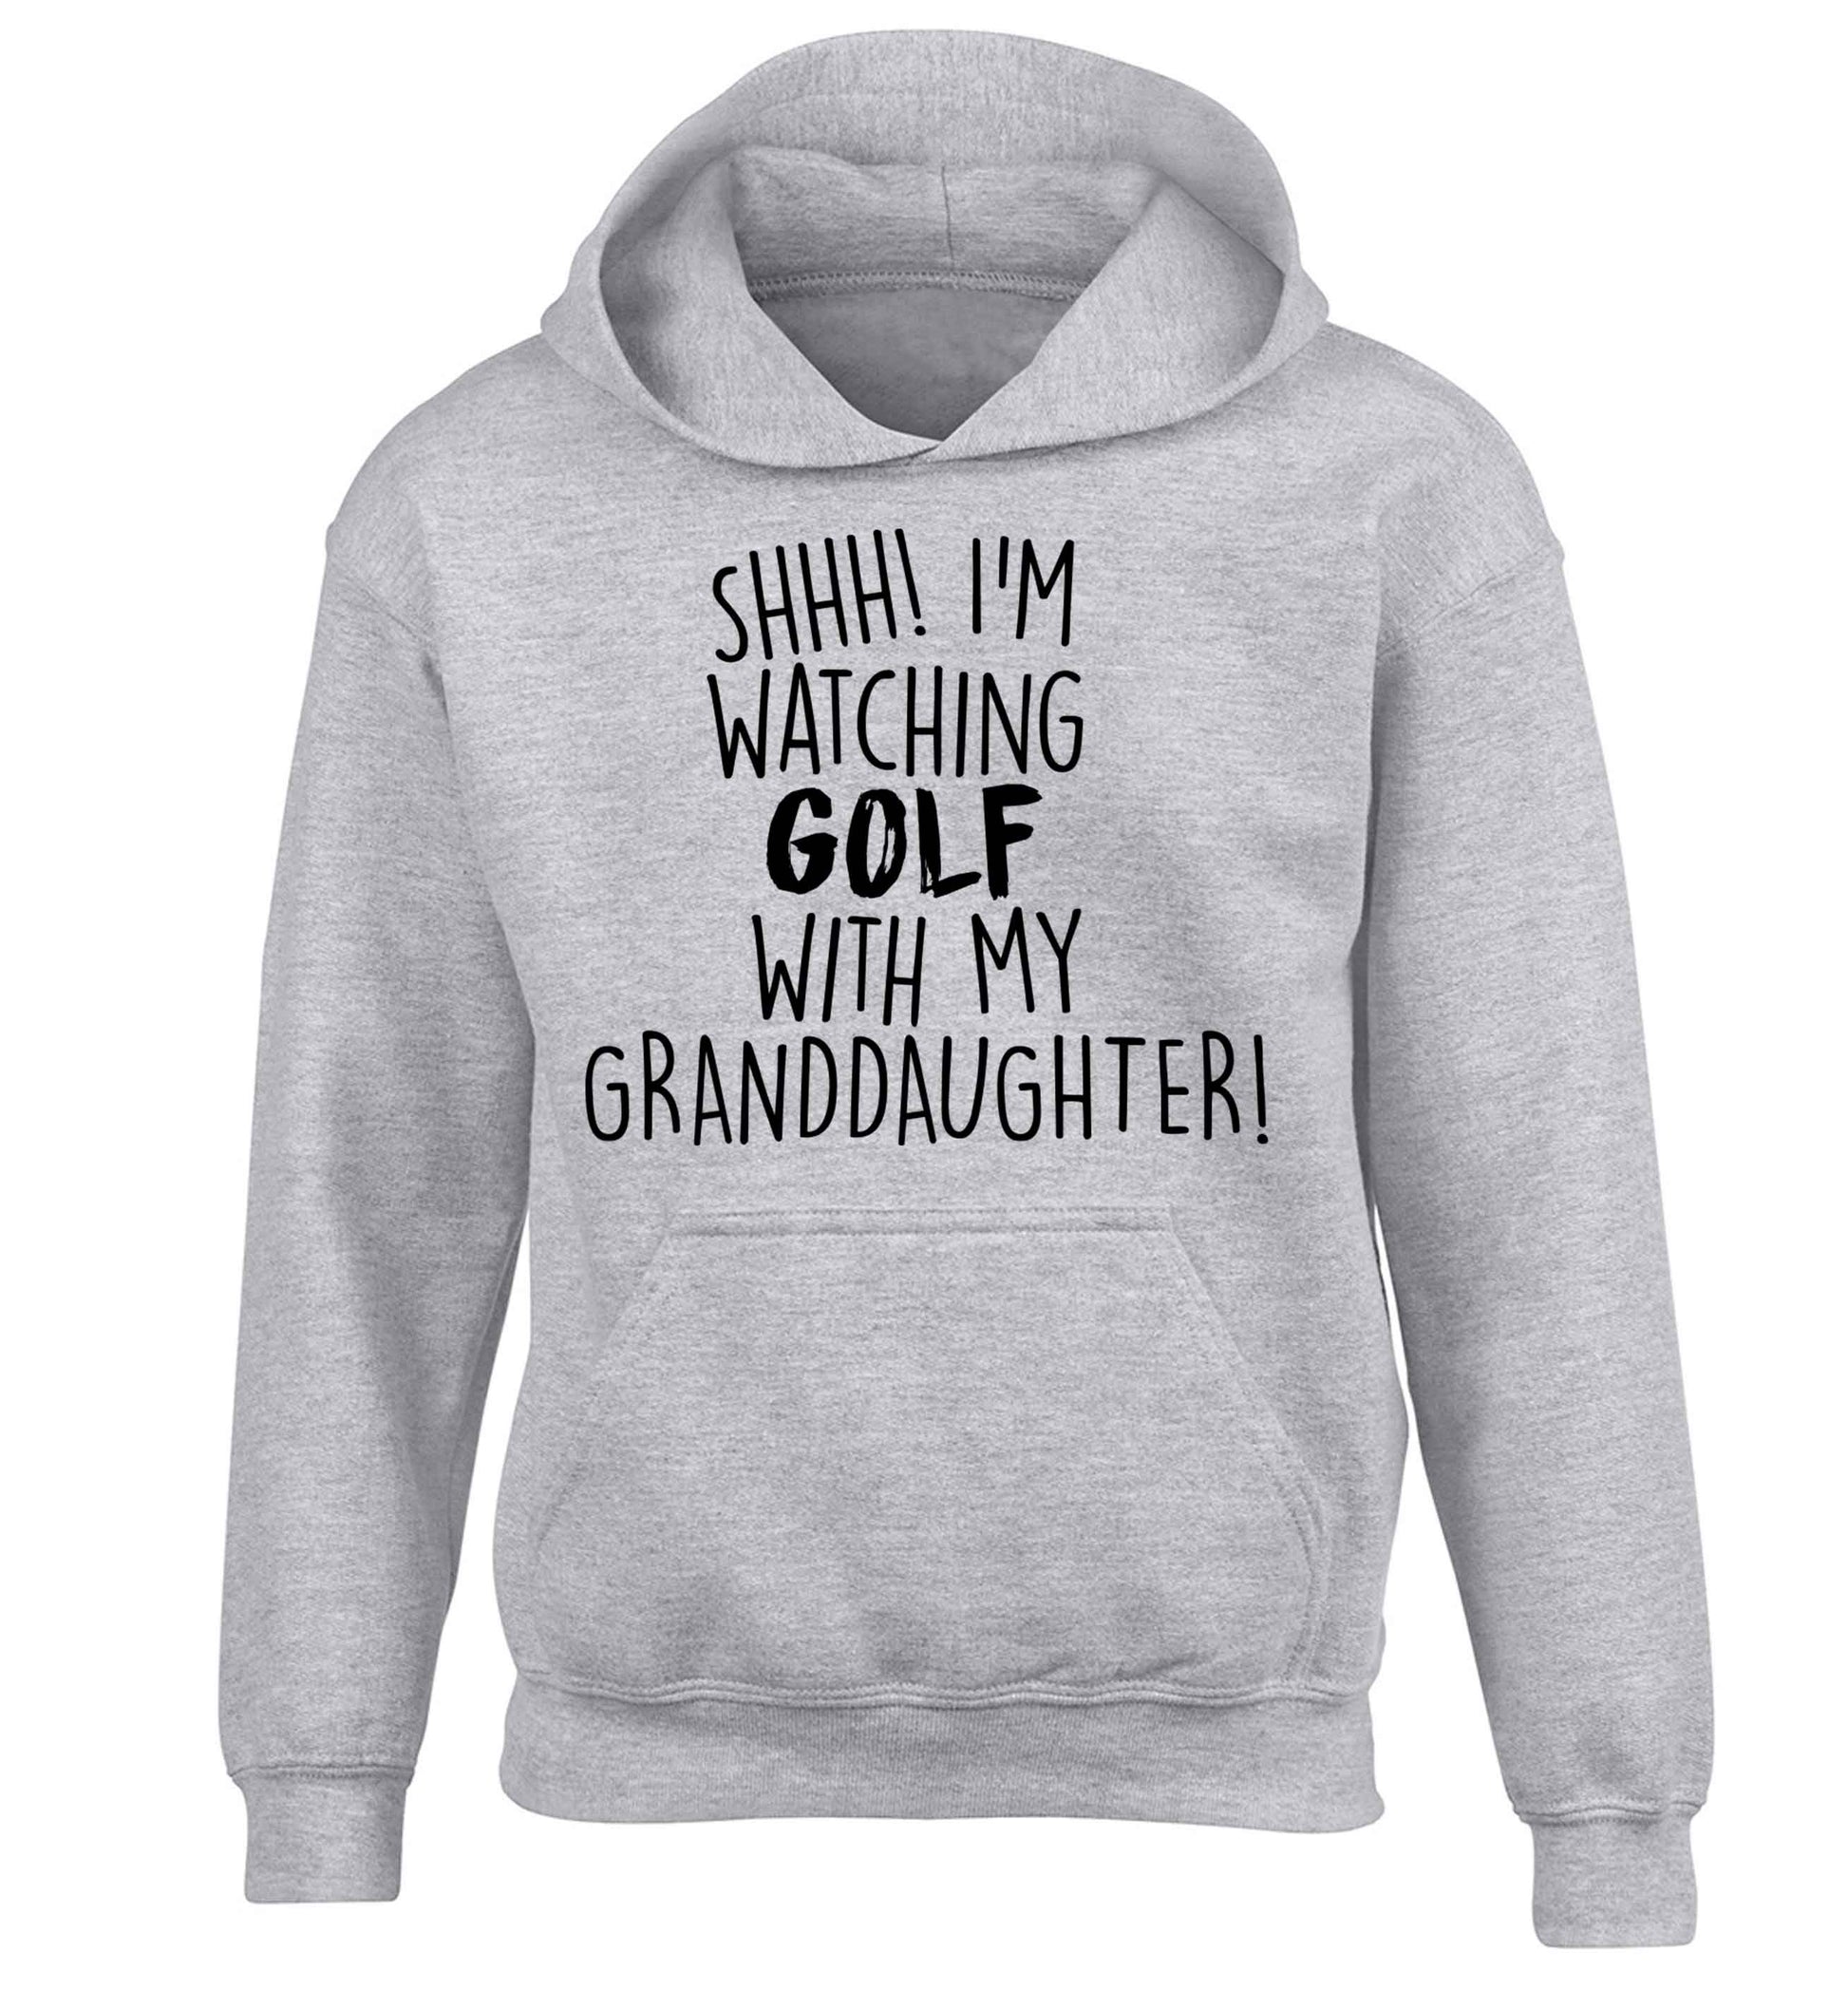 Shh I'm watching golf with my granddaughter children's grey hoodie 12-13 Years